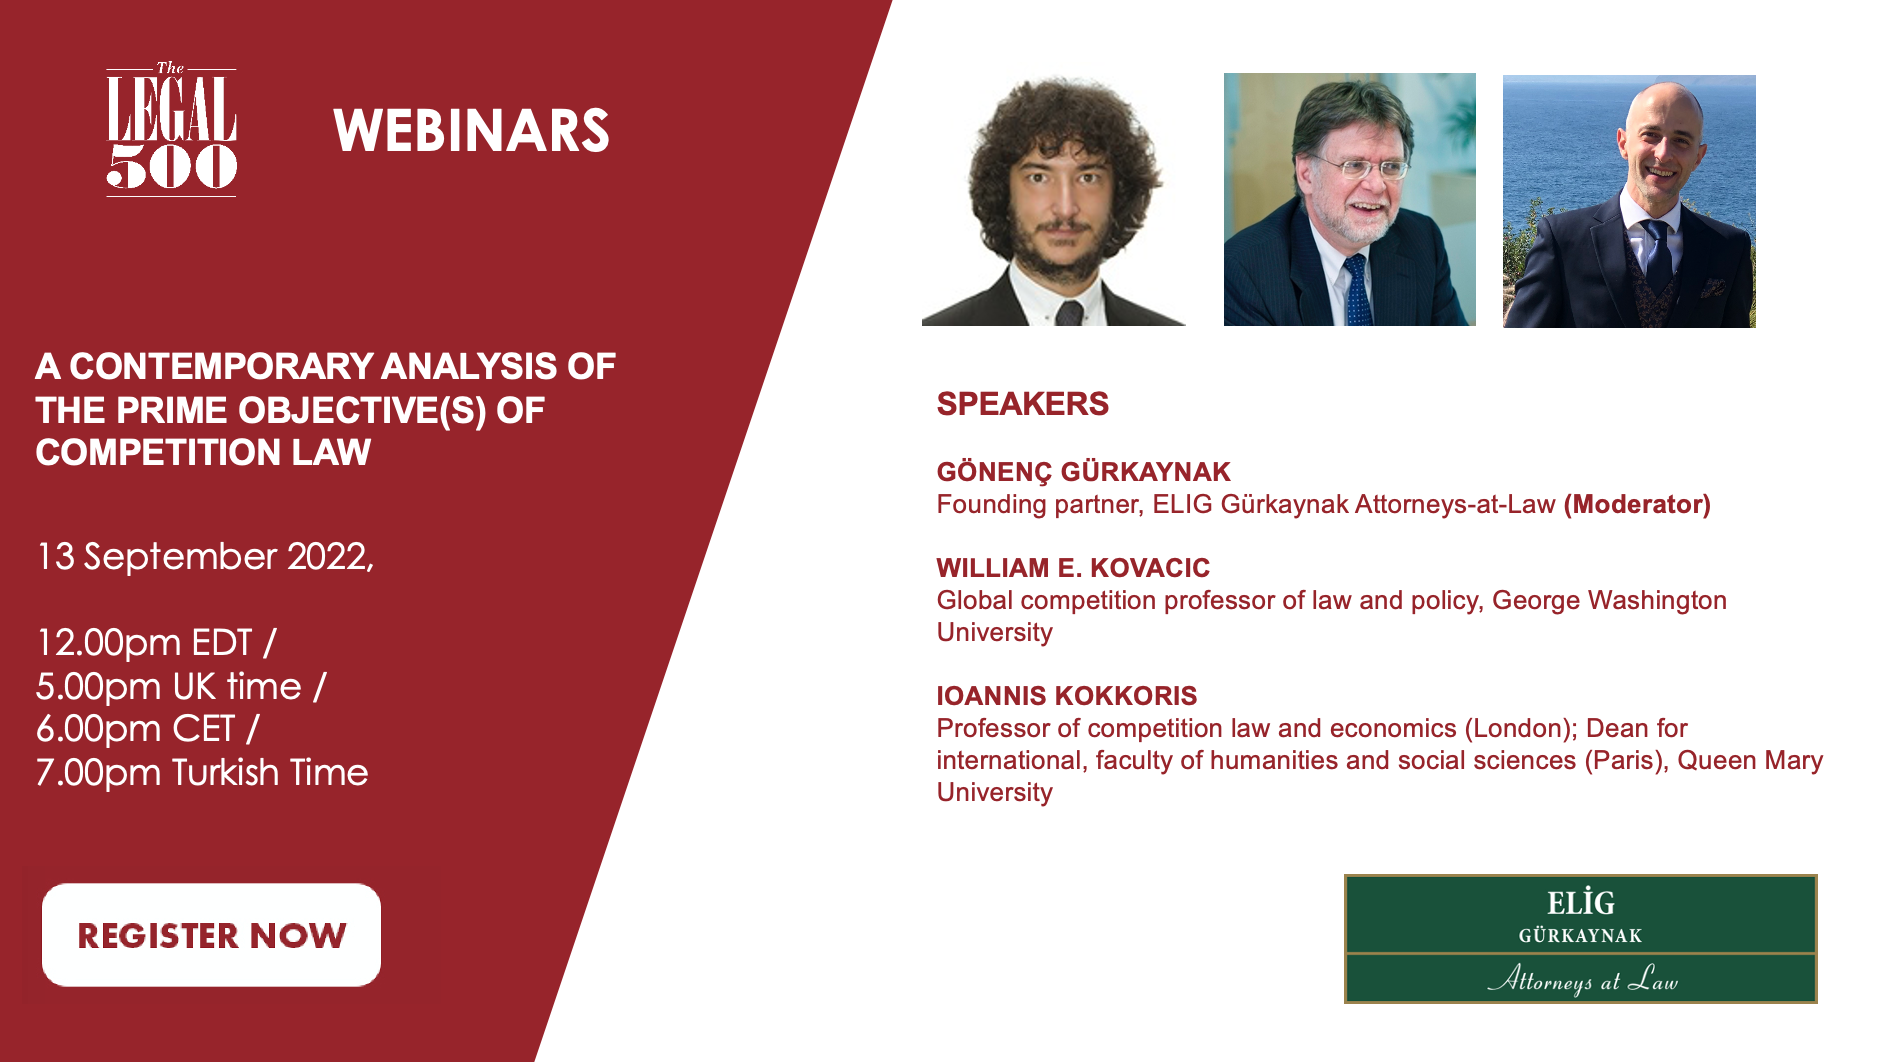 Mr. Gönenç Gürkaynak, the founding partner and head of ELIG Gürkaynak’s competition law and regulatory team, will speak at The Legal 500 webinar entitled “A Contemporary Analysis of The Prime Objective(s) of Competition Law” on Tuesday, September 13, 2022 at 12:00 EDT / 17:00 UK time / 18:00 CET / 19:00 Turkish time